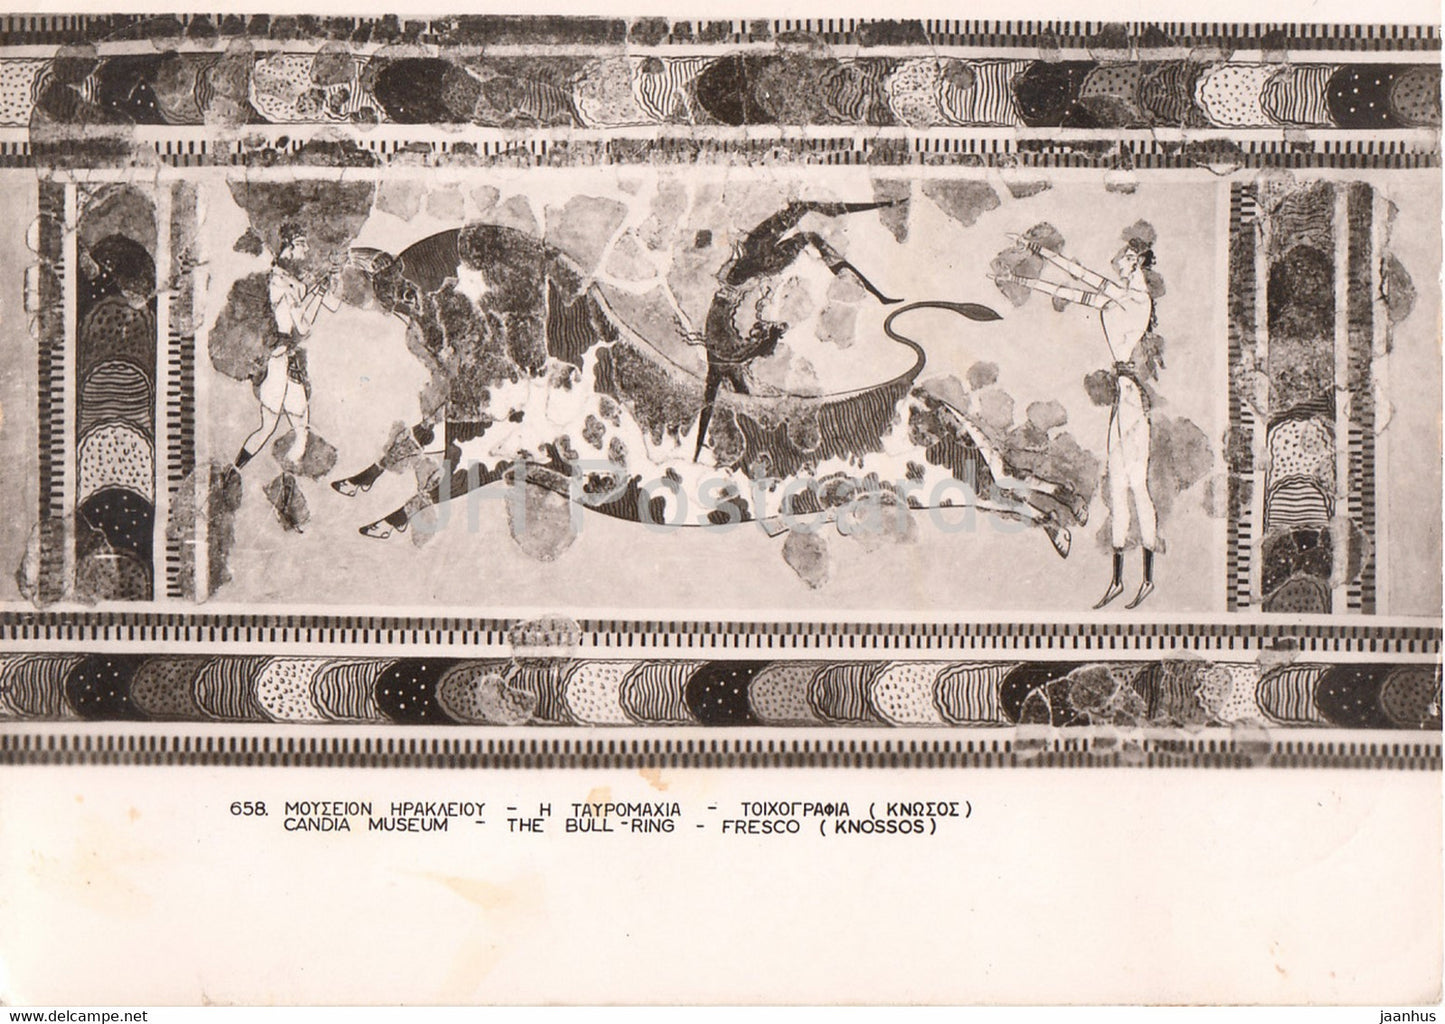 Candia Museum - The Bull Ring - Fresco - Knossos - 658 - ancient - 1962 - Greece - used - JH Postcards